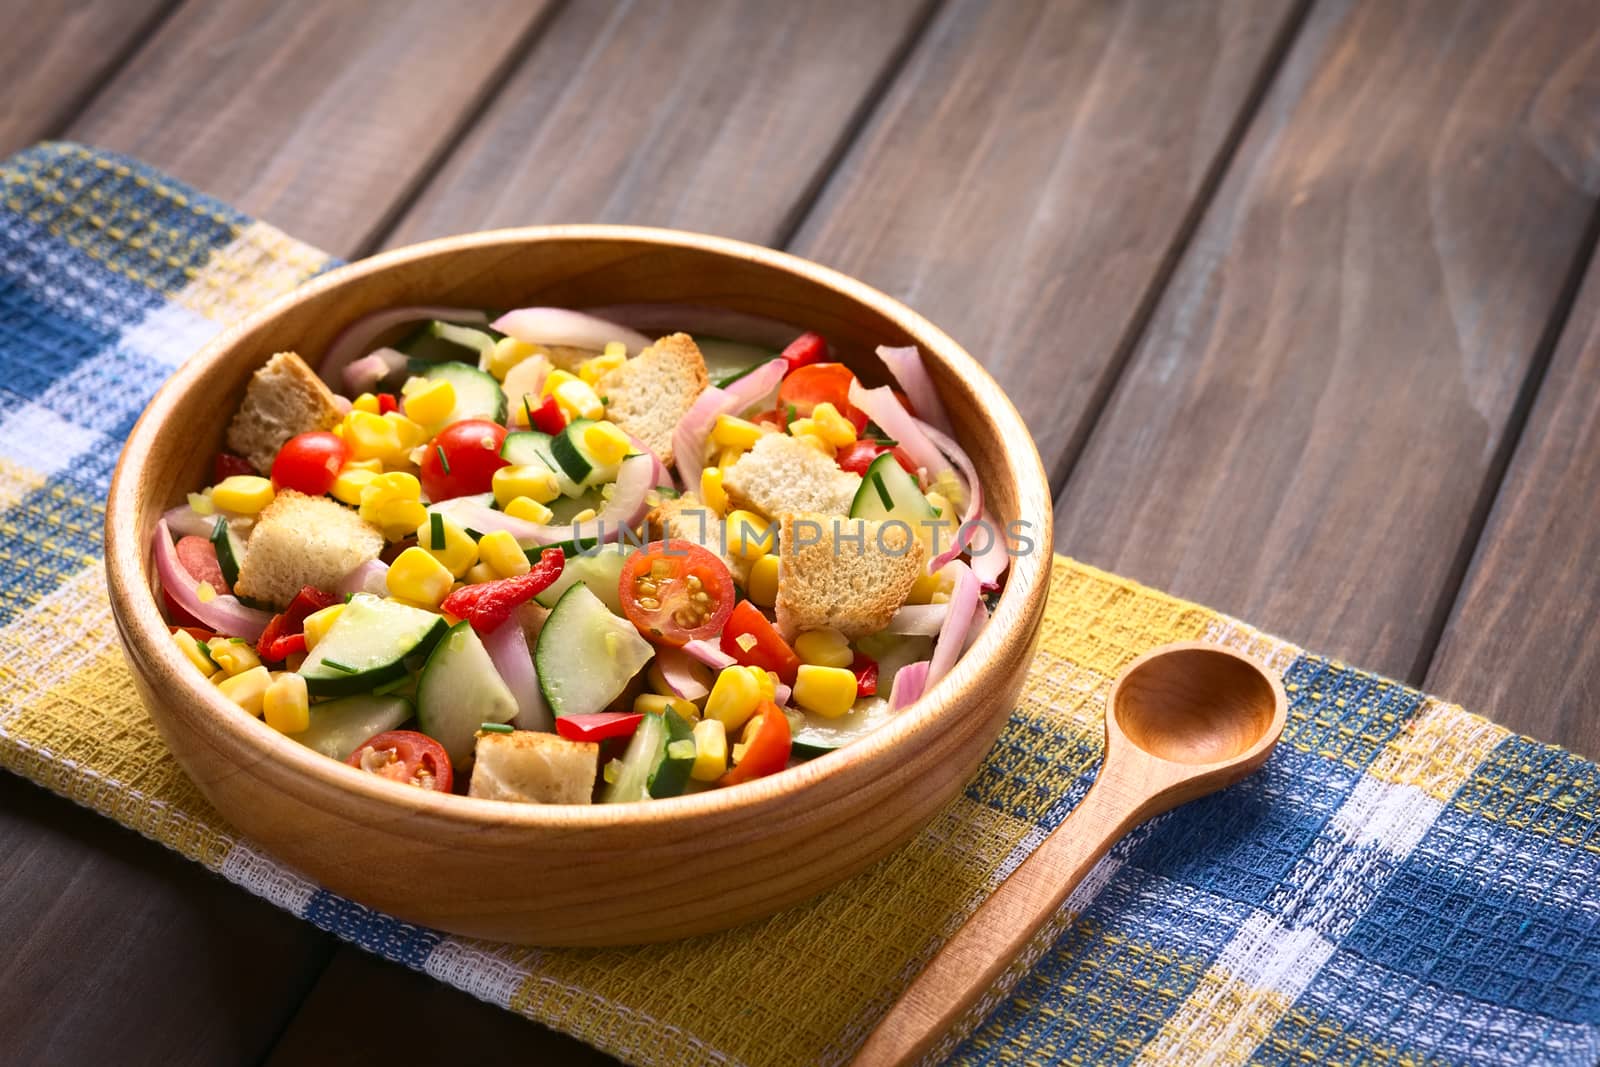 Fresh vegetable salad made of sweet corn, cherry tomato, cucumber, red onion, red pepper, chives with croutons in wooden bowl, photographed on dark wood with natural light (Selective Focus, Focus one third into the salad)